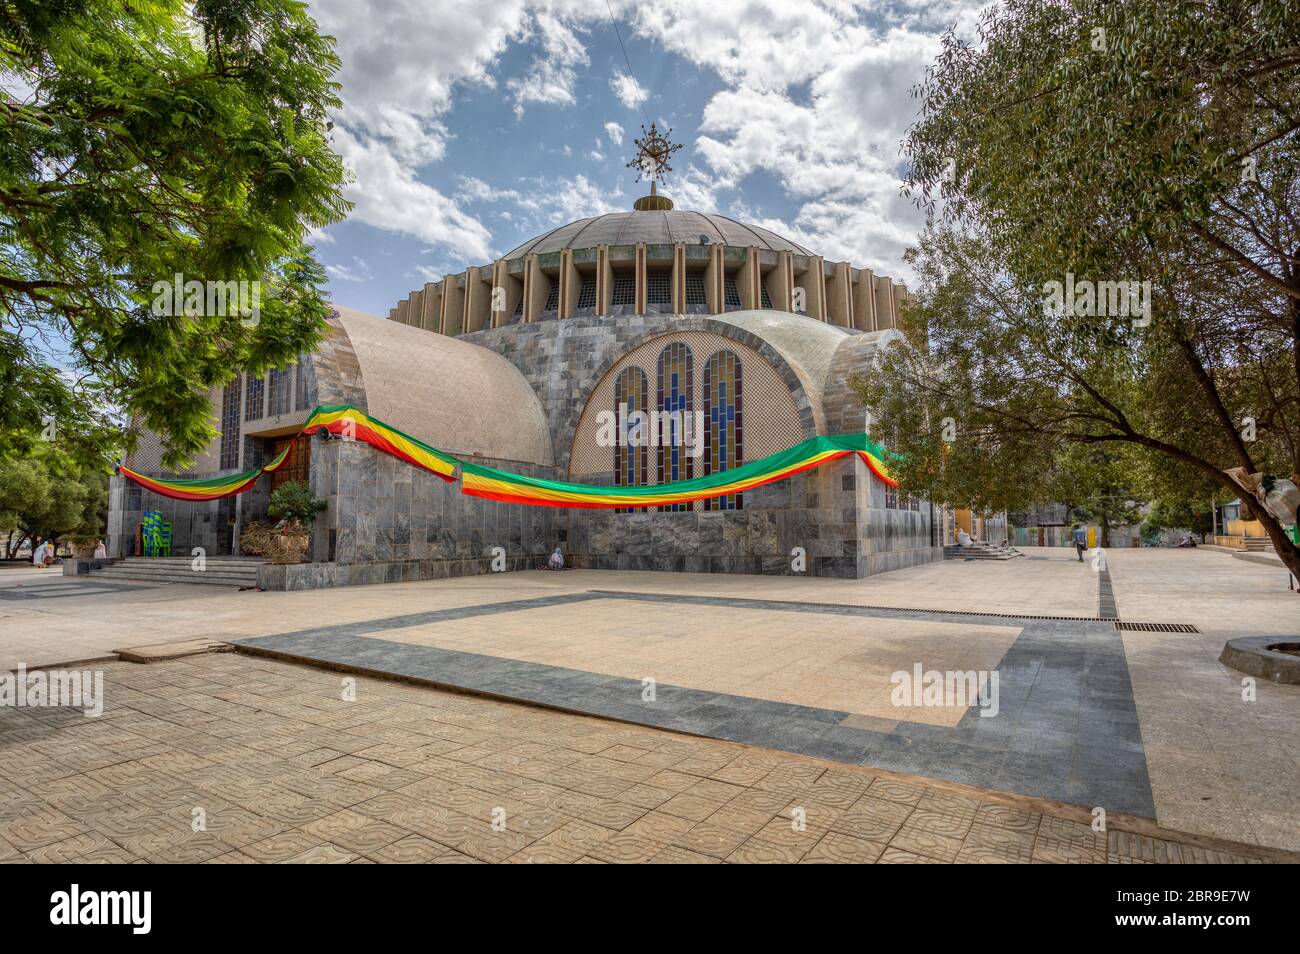 Famous cultural heritage Church of Our Lady of Zion in Axum. Ethiopian Orthodox Tewahedo Church built by Emperor Haile Selassie in the 1950s. Stock Photo